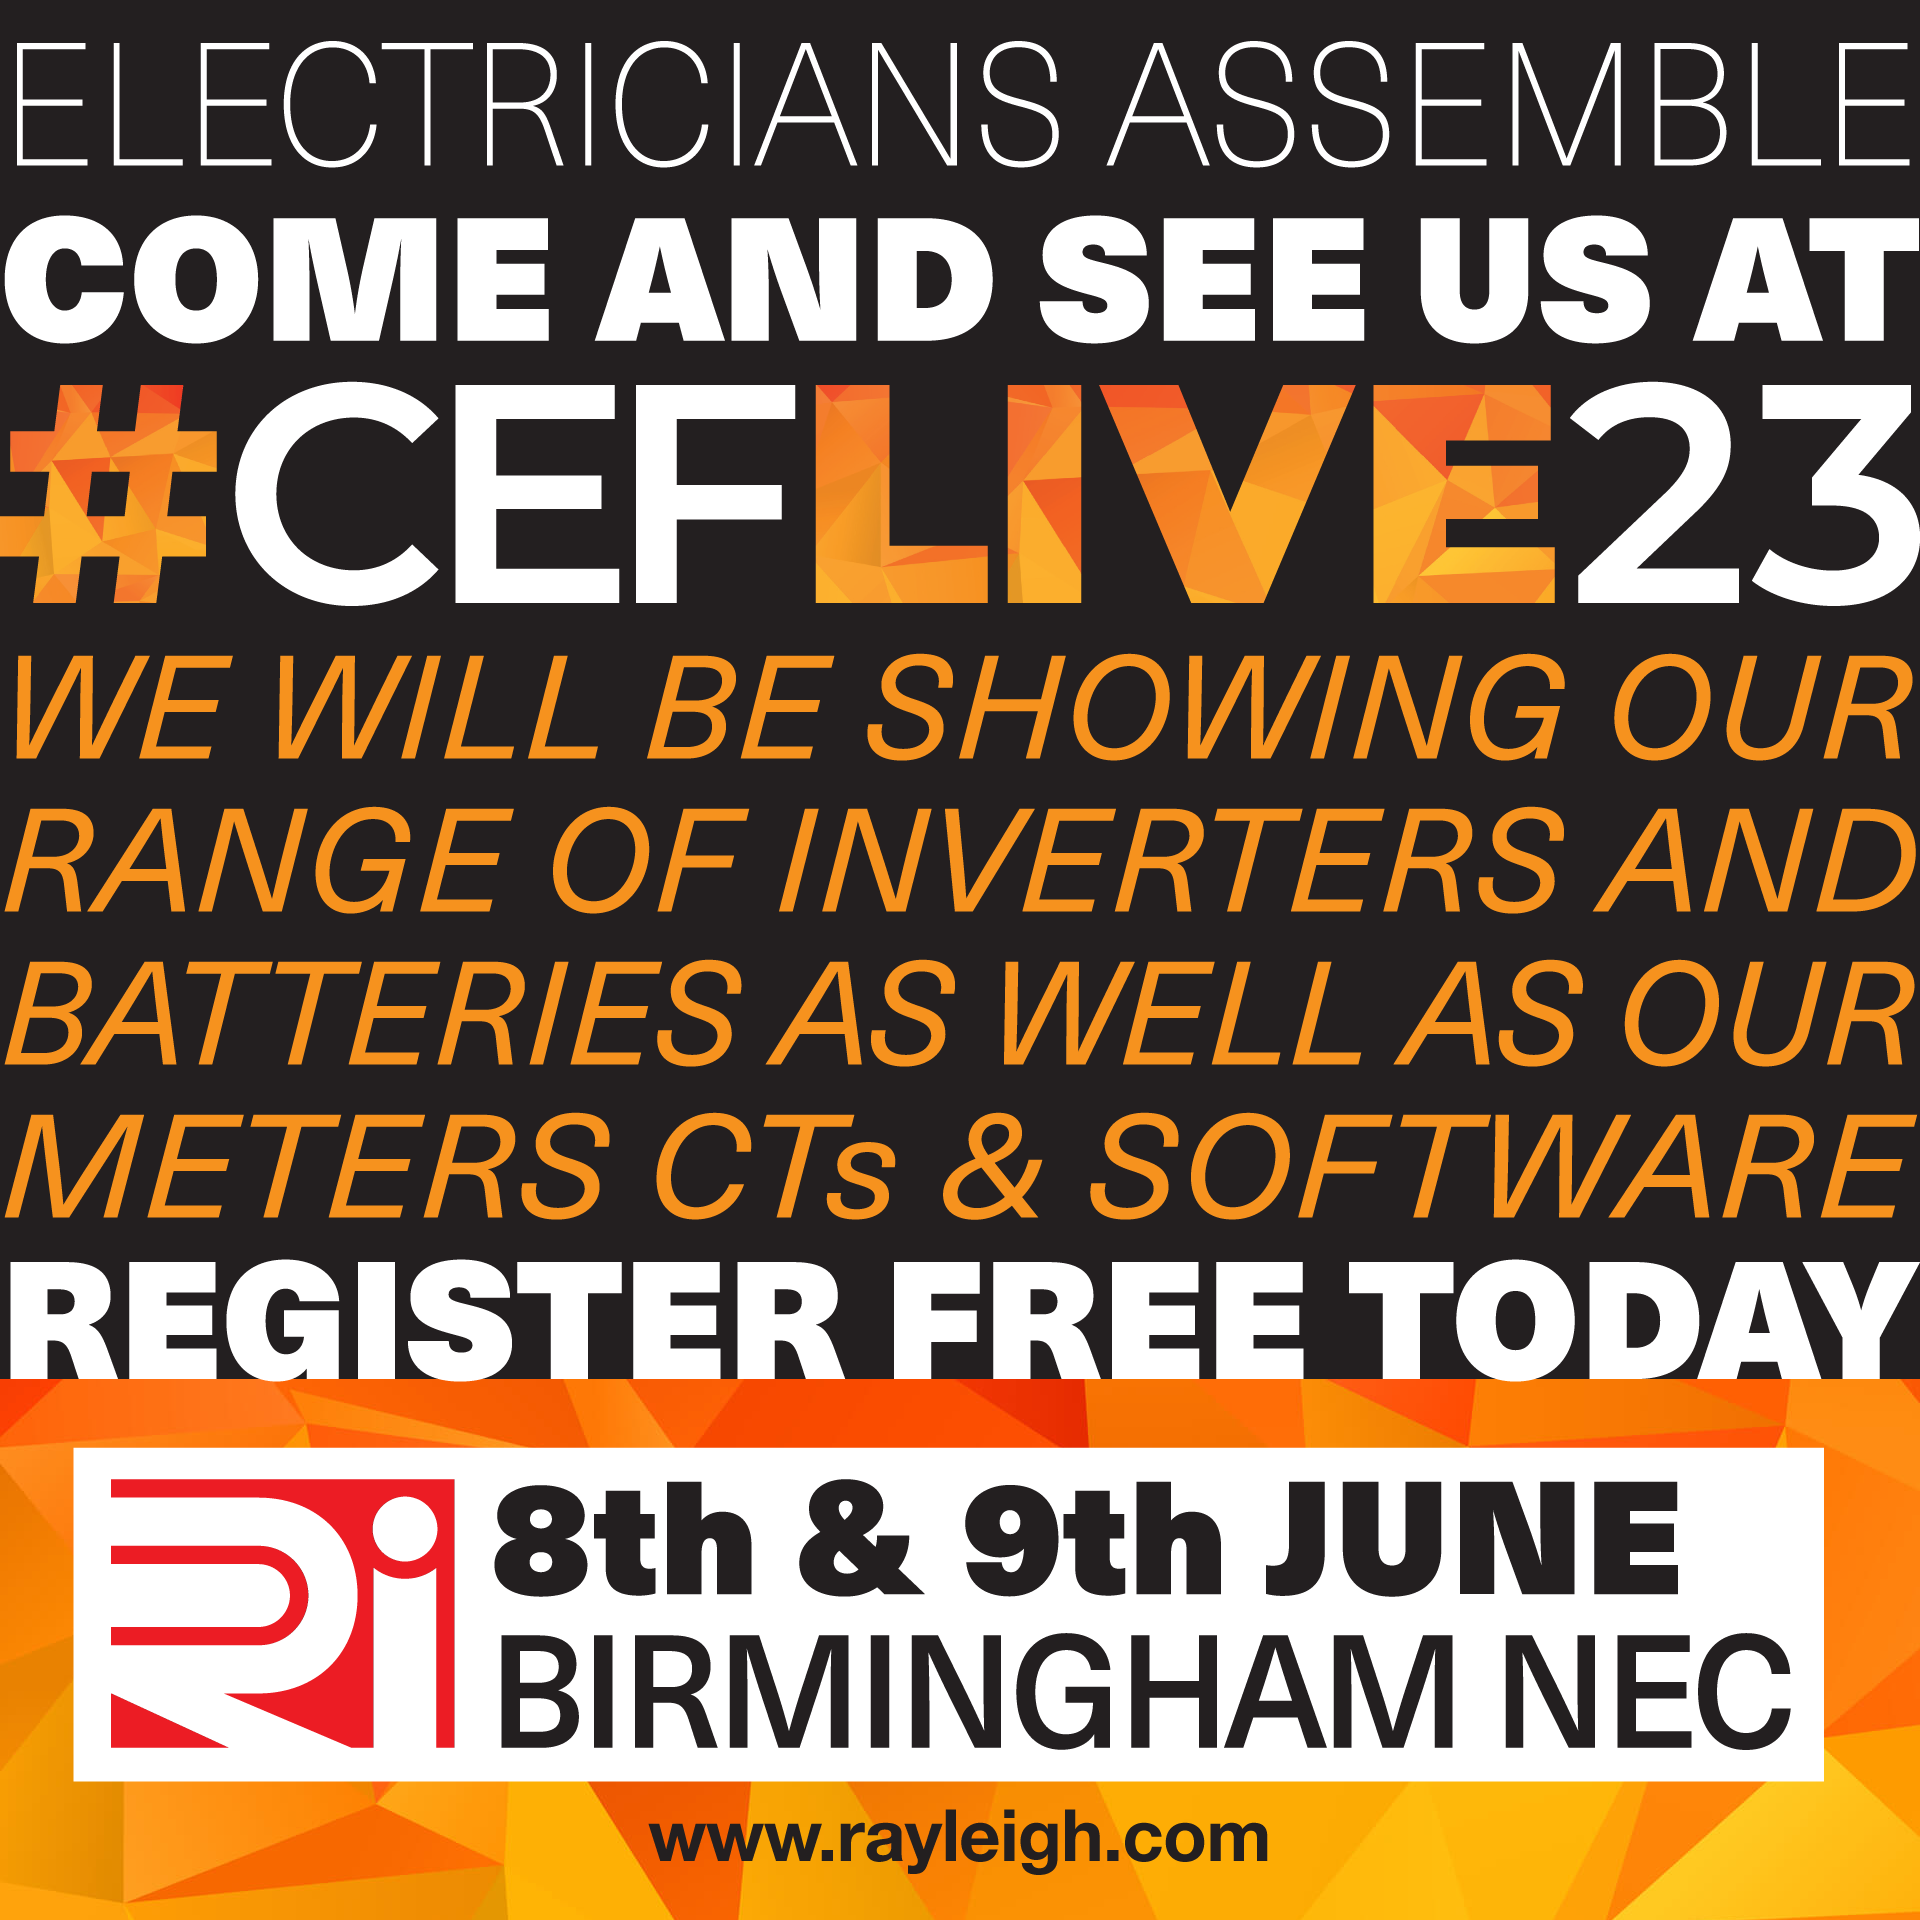 We are exhibiting at CEFLIVE23 Birmingham NEC this June - the Exhibition for Electricians